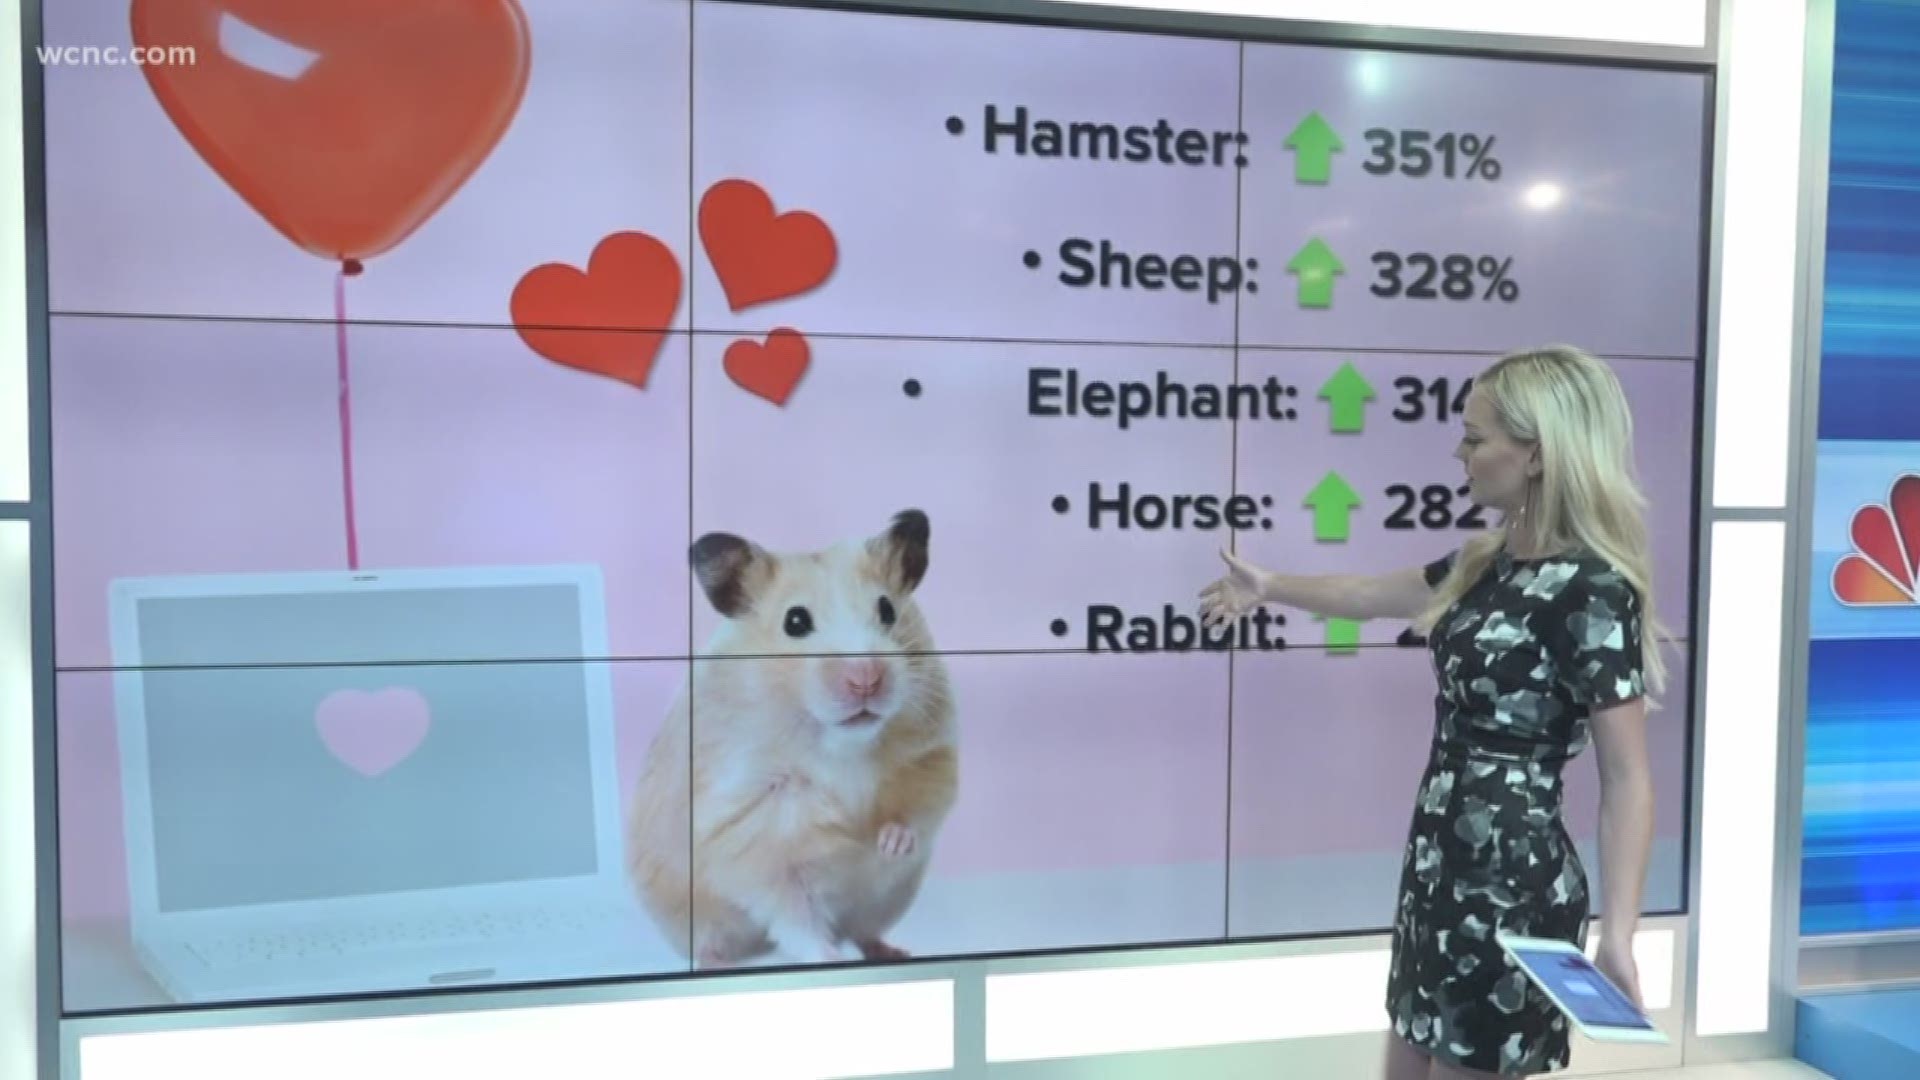 If you're looking for love online, you might want to post a picture of a hamster. According to Zoosk, your chances are up 351 percent if you have a photo of a hamster on your profile.